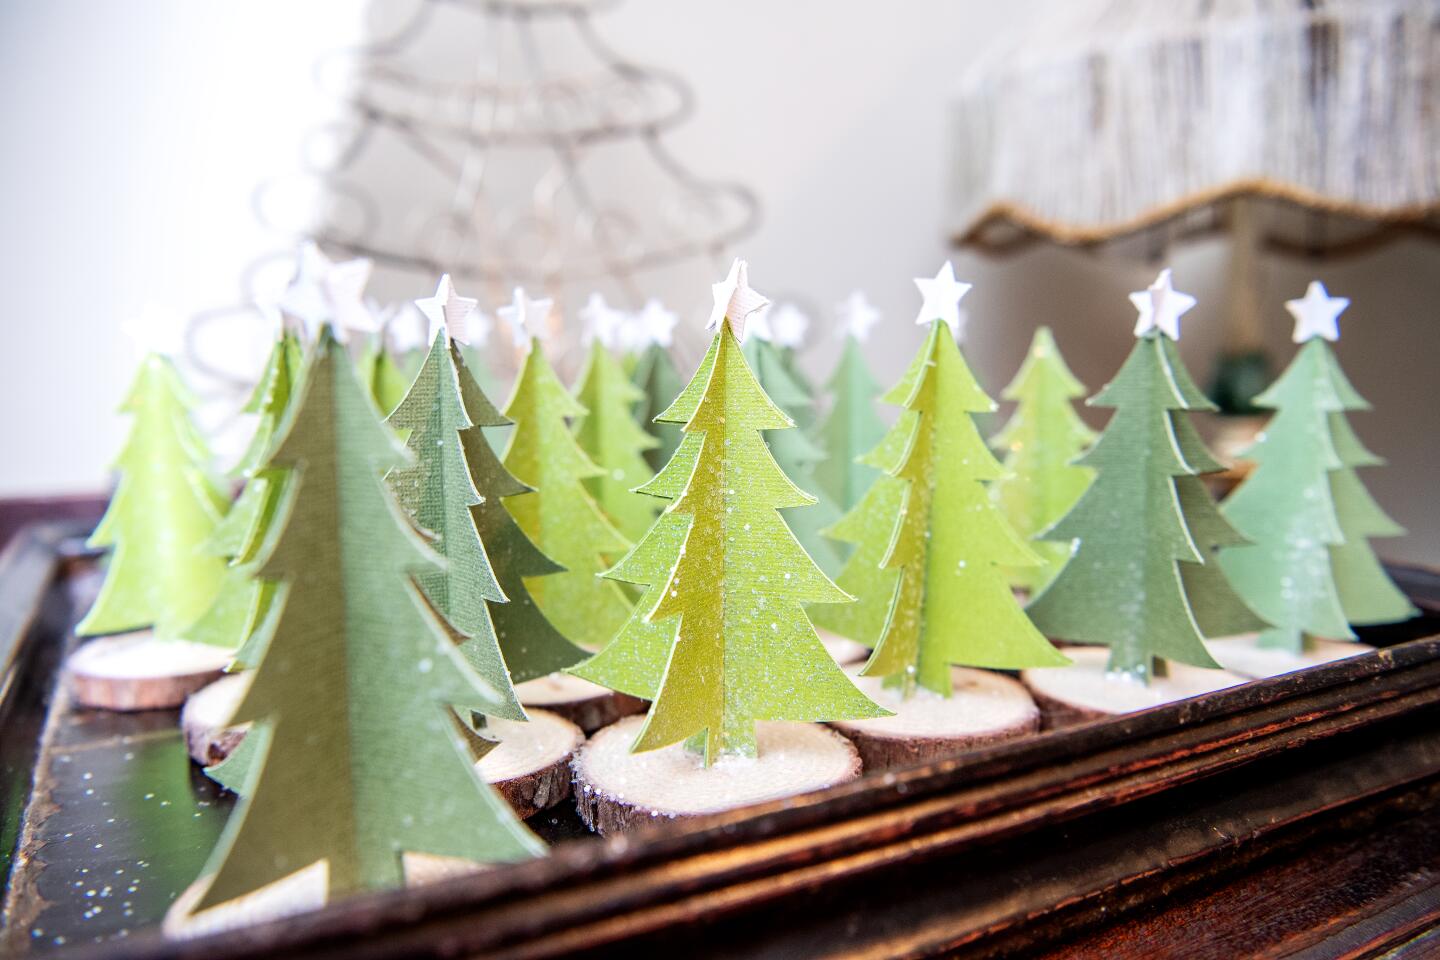 DIY tree decorations, made by Saeta, are detailed on her blog My 100 Year Old Home.